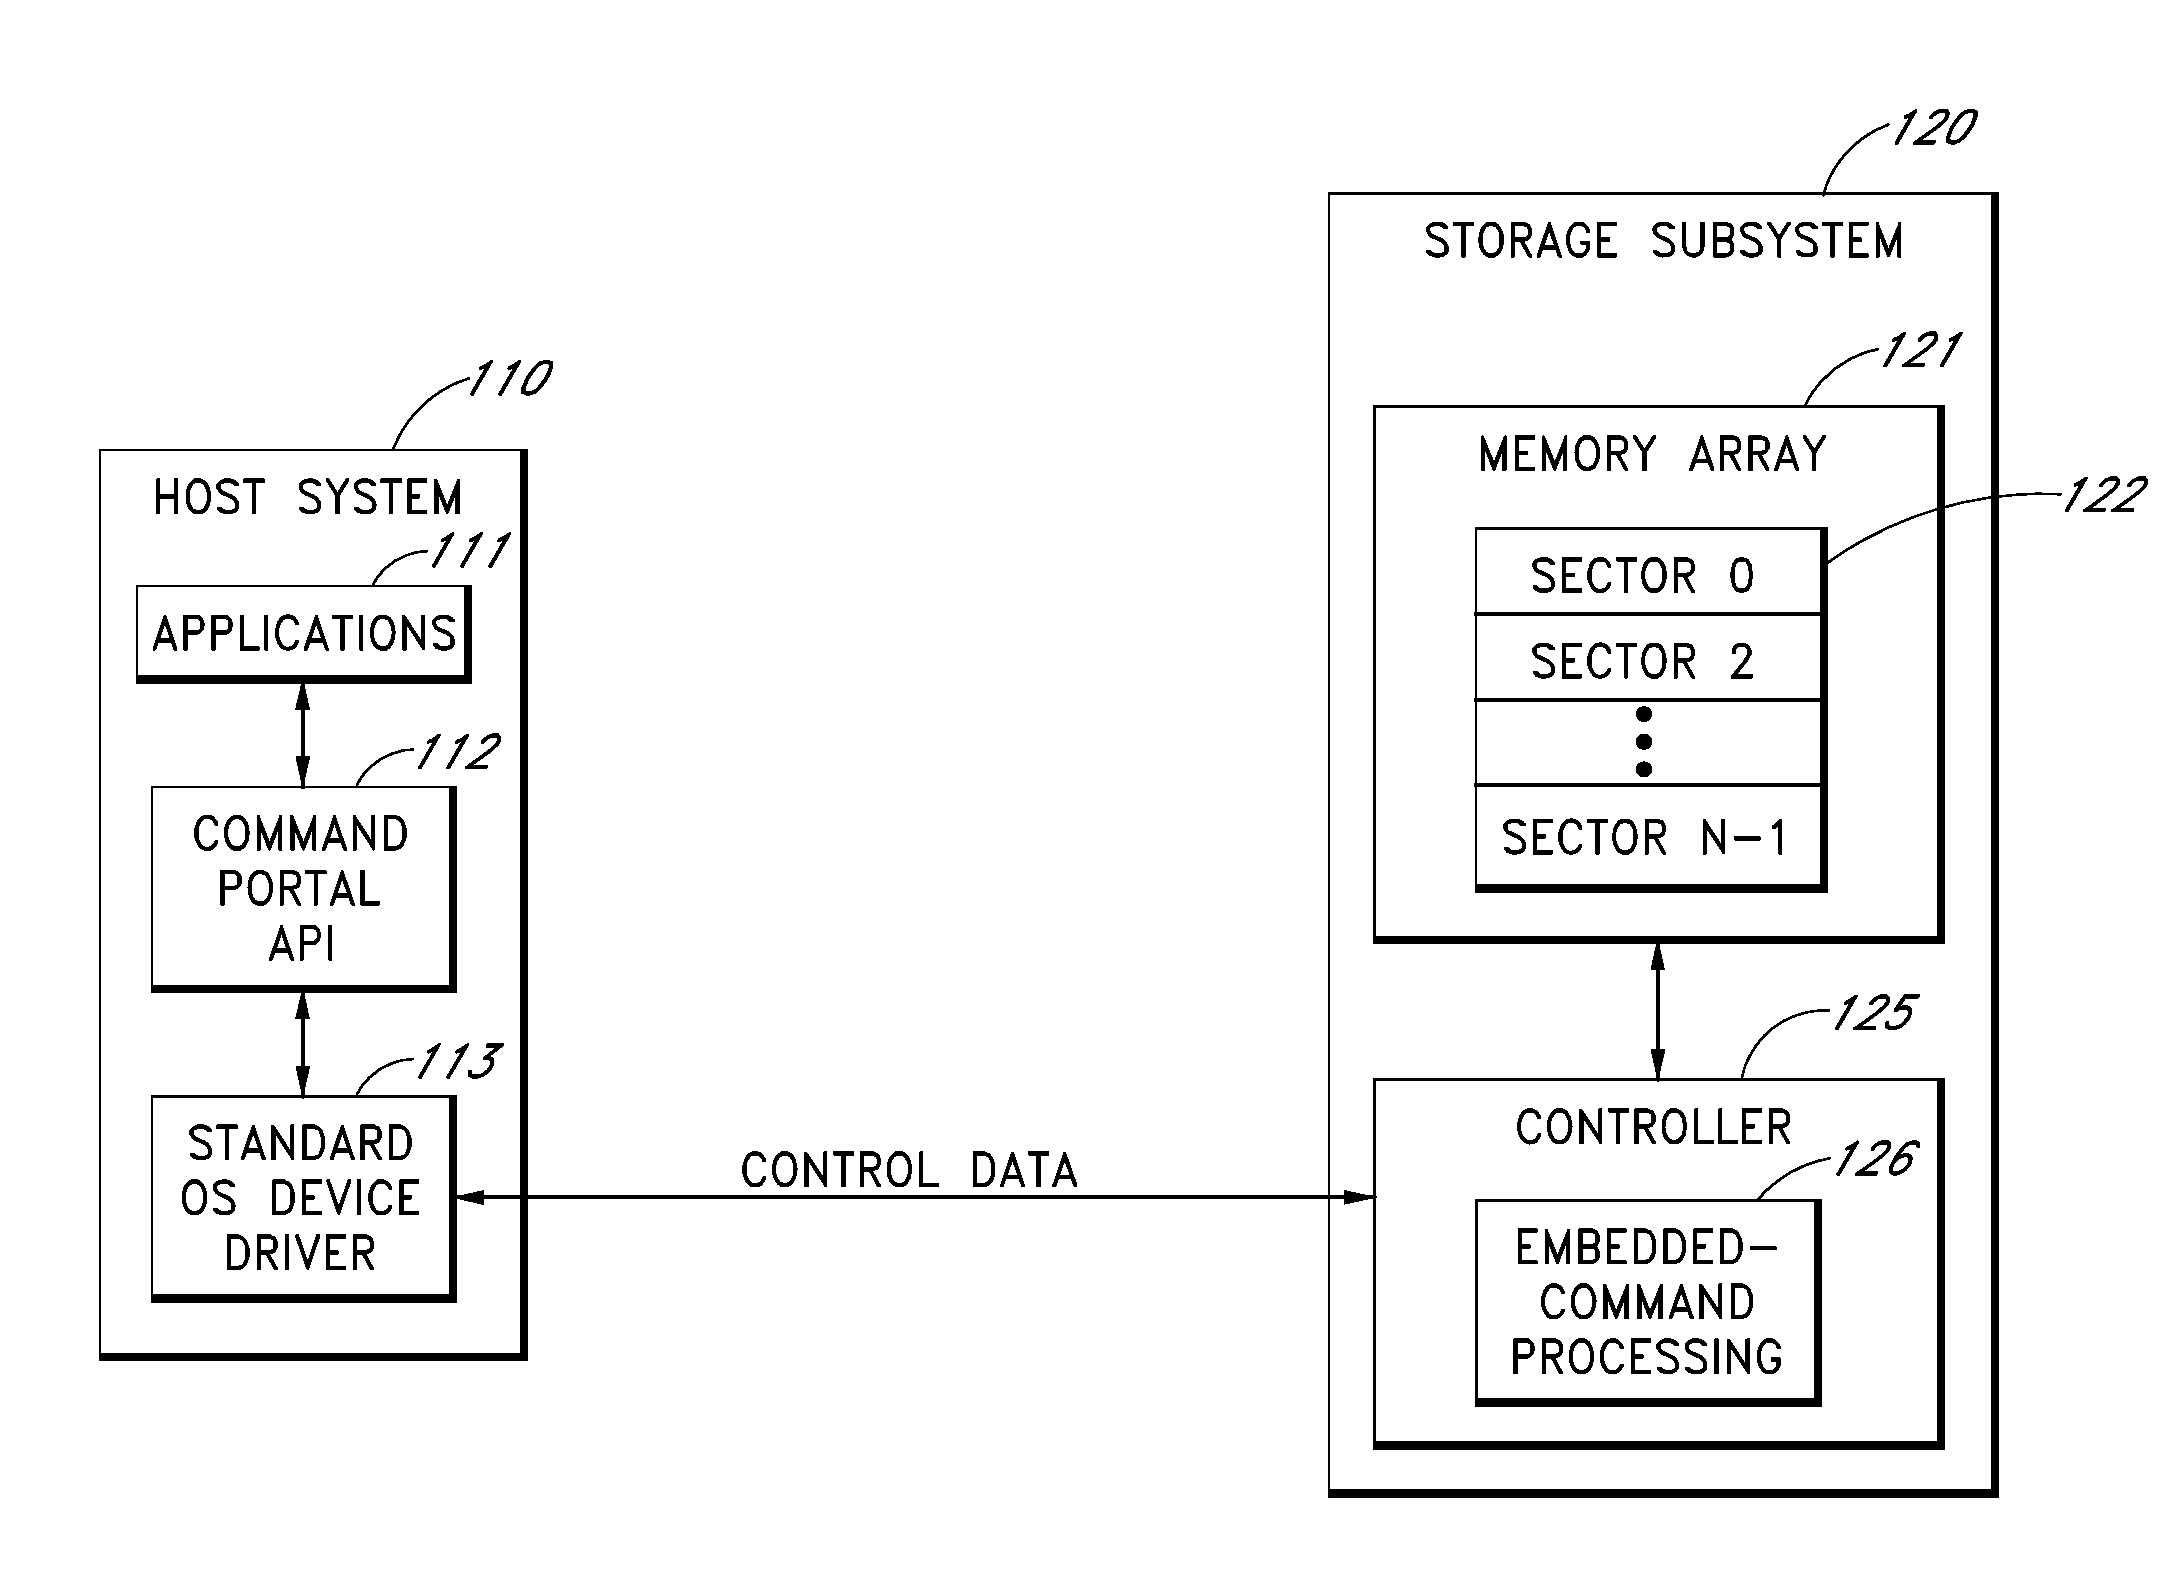 Command portal for securely communicating and executing non-standard storage subsystem commands